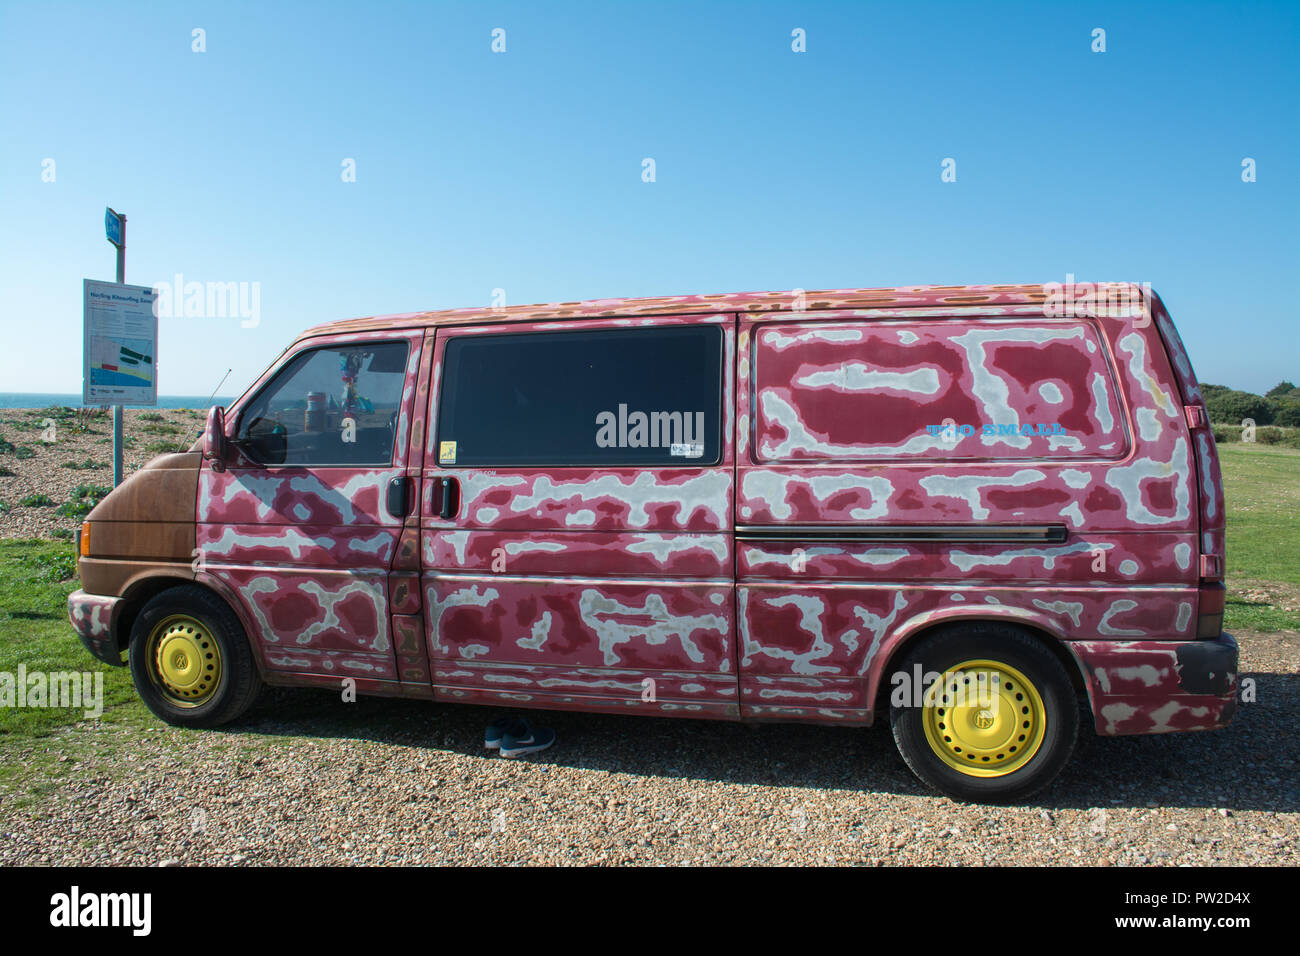 Colourful van painted red and white with bright yellow wheels parked close to the beach in Hampshire, UK Stock Photo